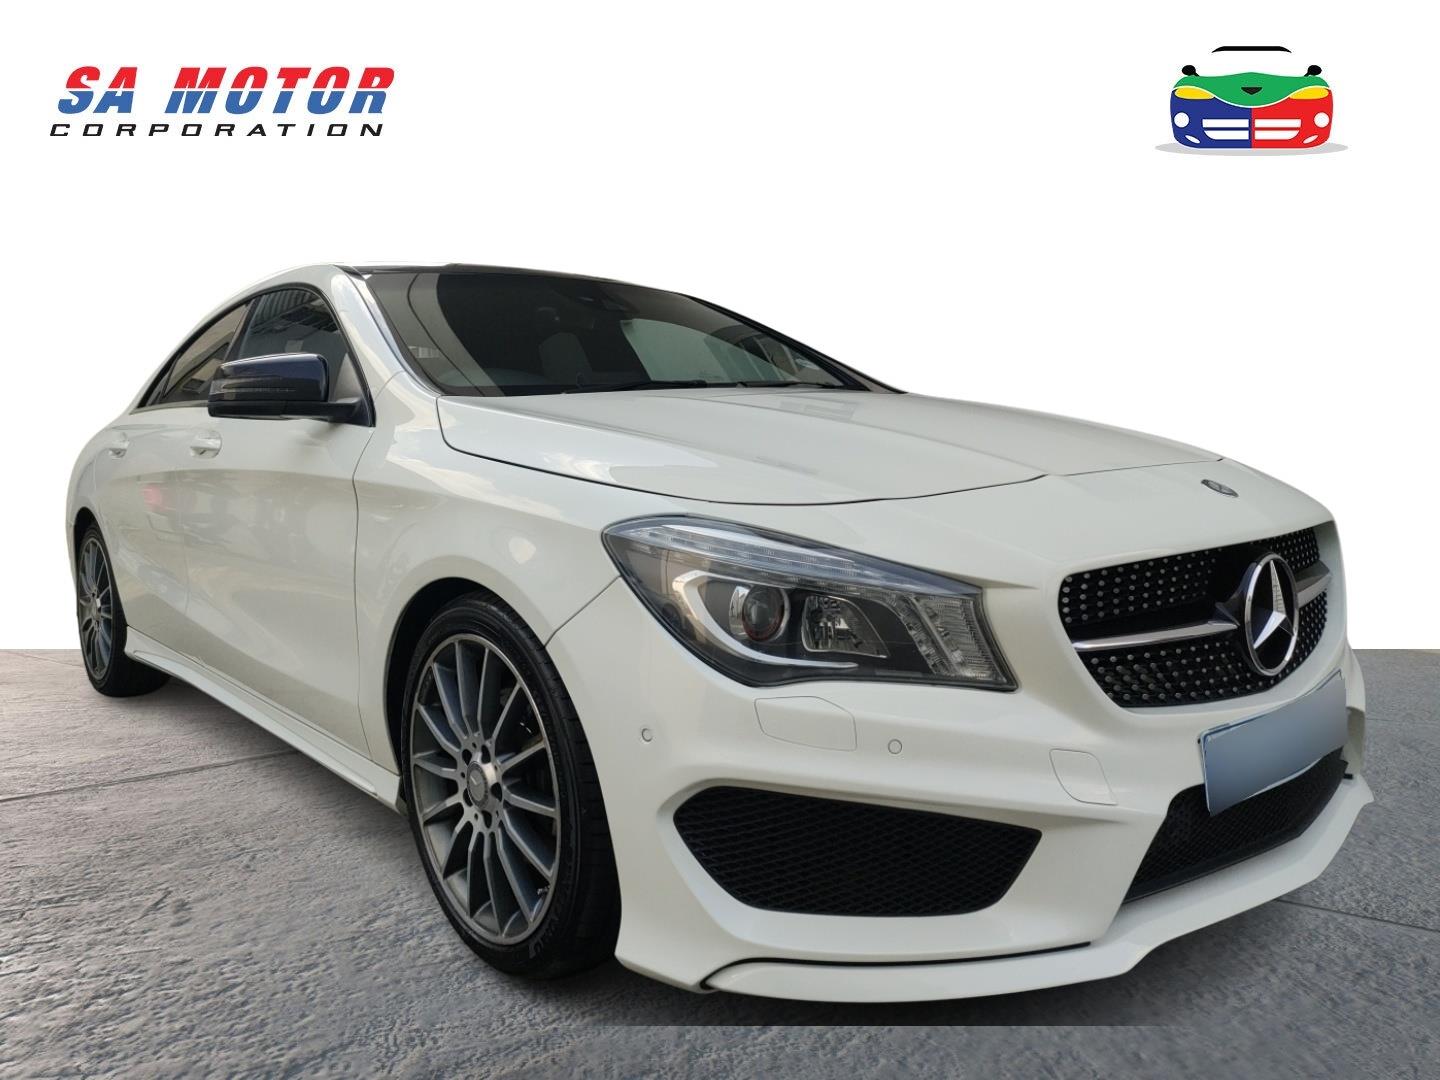 2016 Mercedes-Benz Cla  200 Amg 7G-Dct for sale - 329521